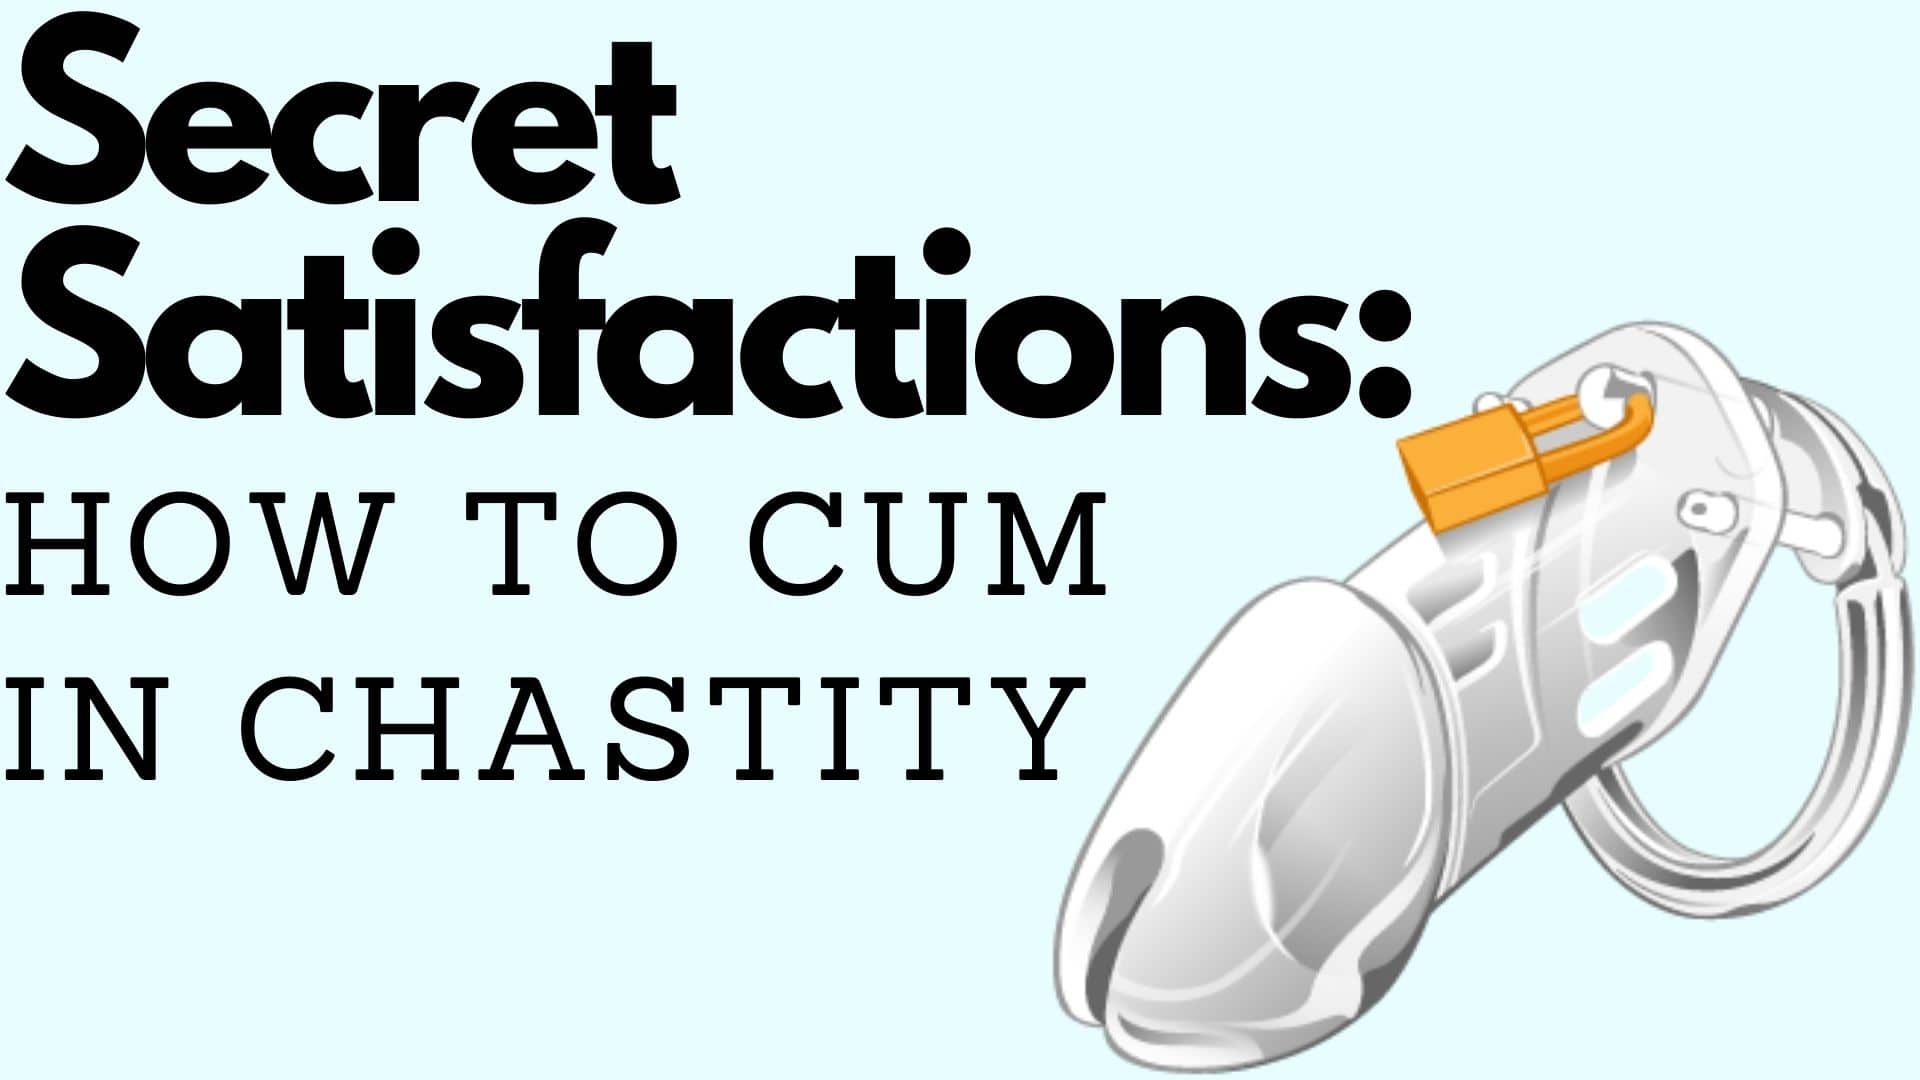 How to Cum in Chastity